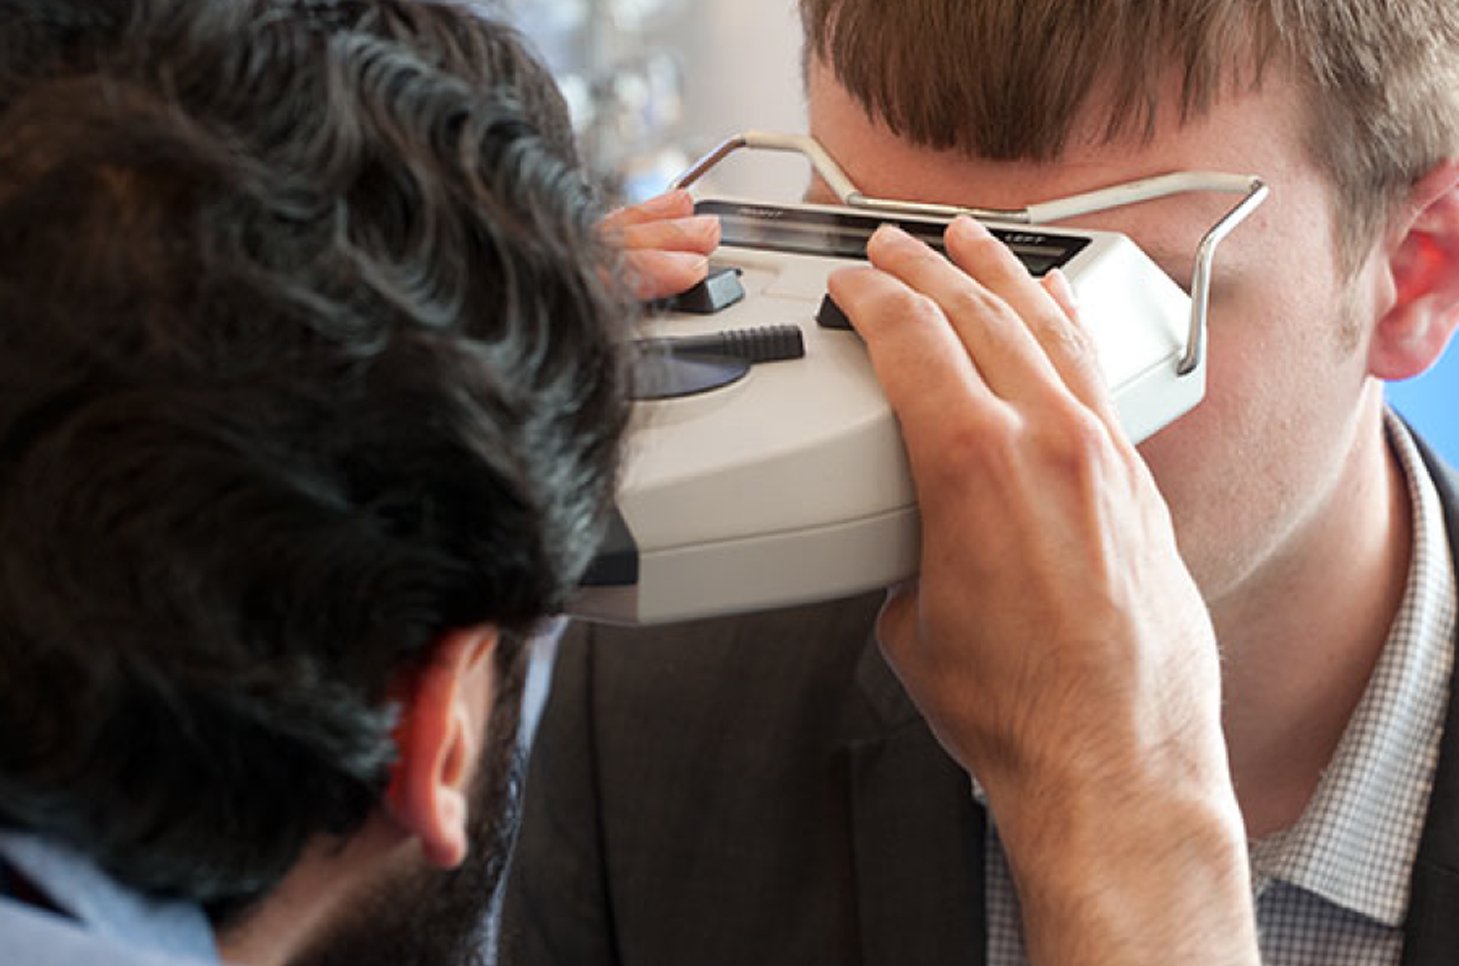 Optician checking boy's eyes with device